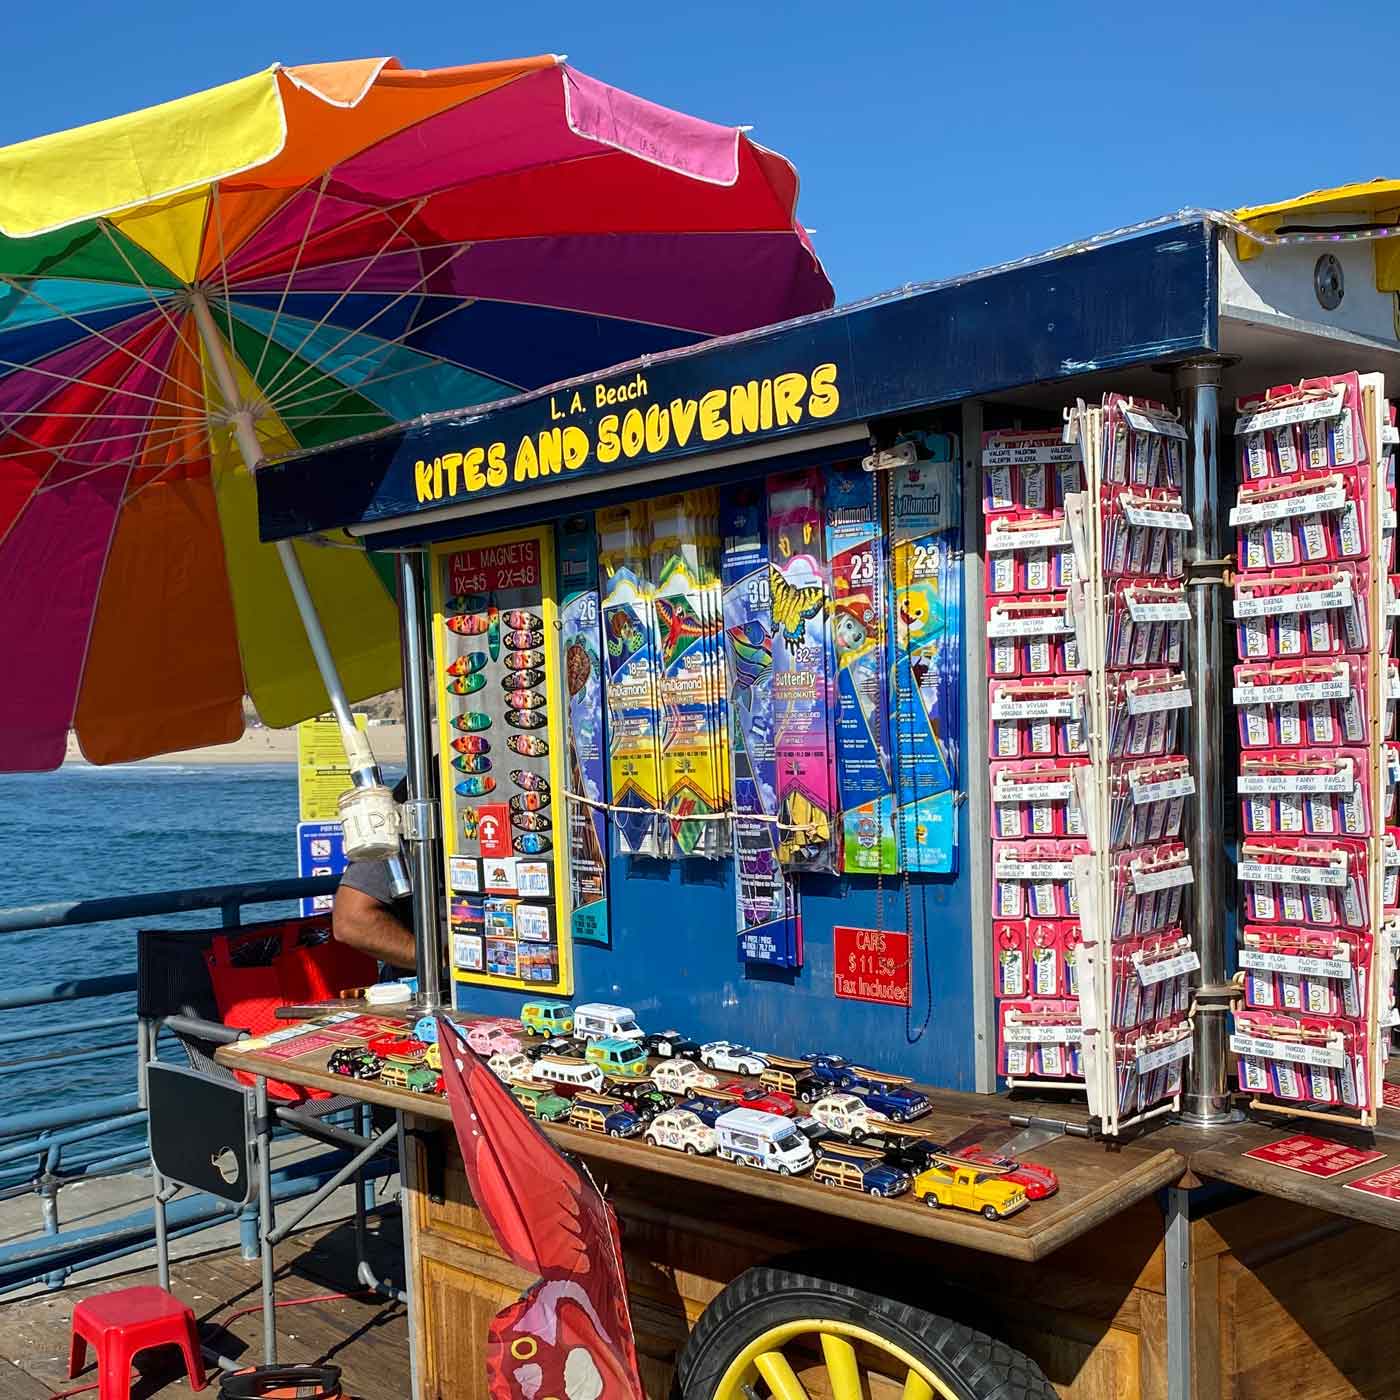 #FunFactFriday: January 14th is #NationalKiteDay – the beach is a great place to fly a kite! If you’re looking for a place to get a souvenir kite, check out LA Beach Kites & Souvenirs – a small blue vendor cart located on the pier boardwalk near Maria Sol’s Cantina at the west end. They sell small novelty kites in fun shapes that will look swell sailing above the sandy beach. 🏖️🪁